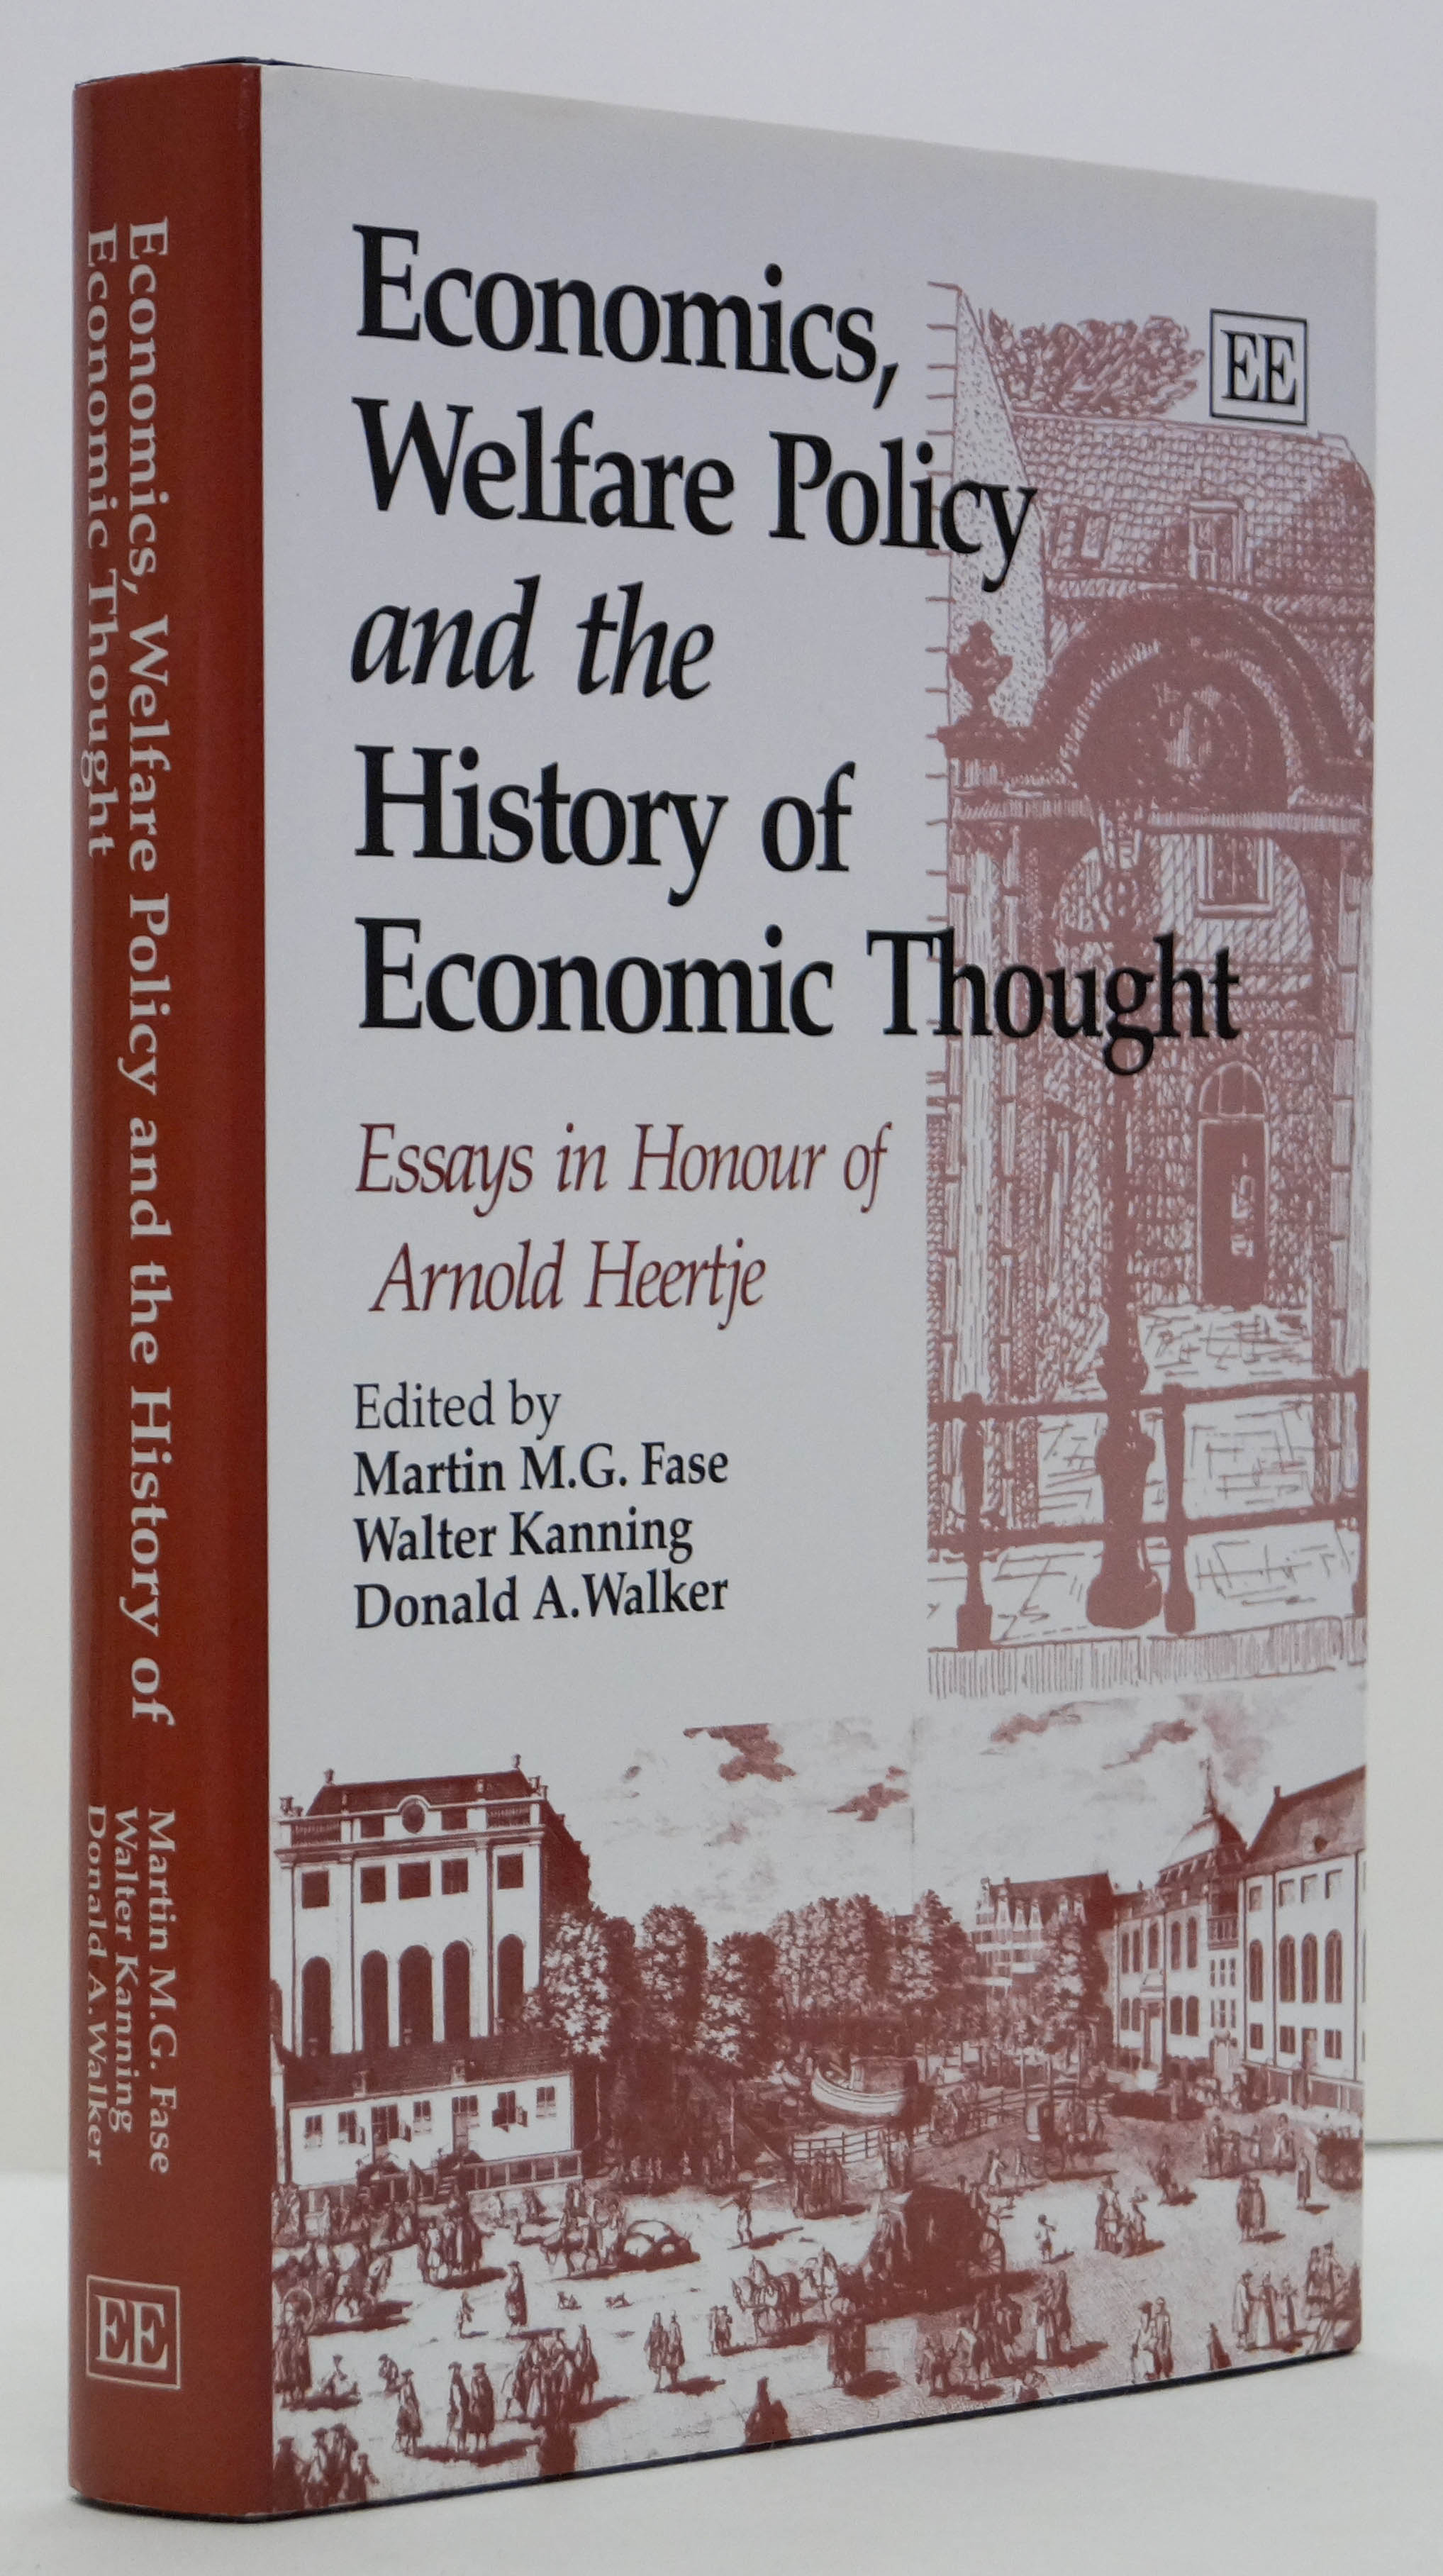 HEERTJE, A., FASE, M.M.G., KANNING, W. , WALKER, D.A., (ed.) - Economics, welfare policy and the history of economic thought. Essays in honour of Arnold Heertje.